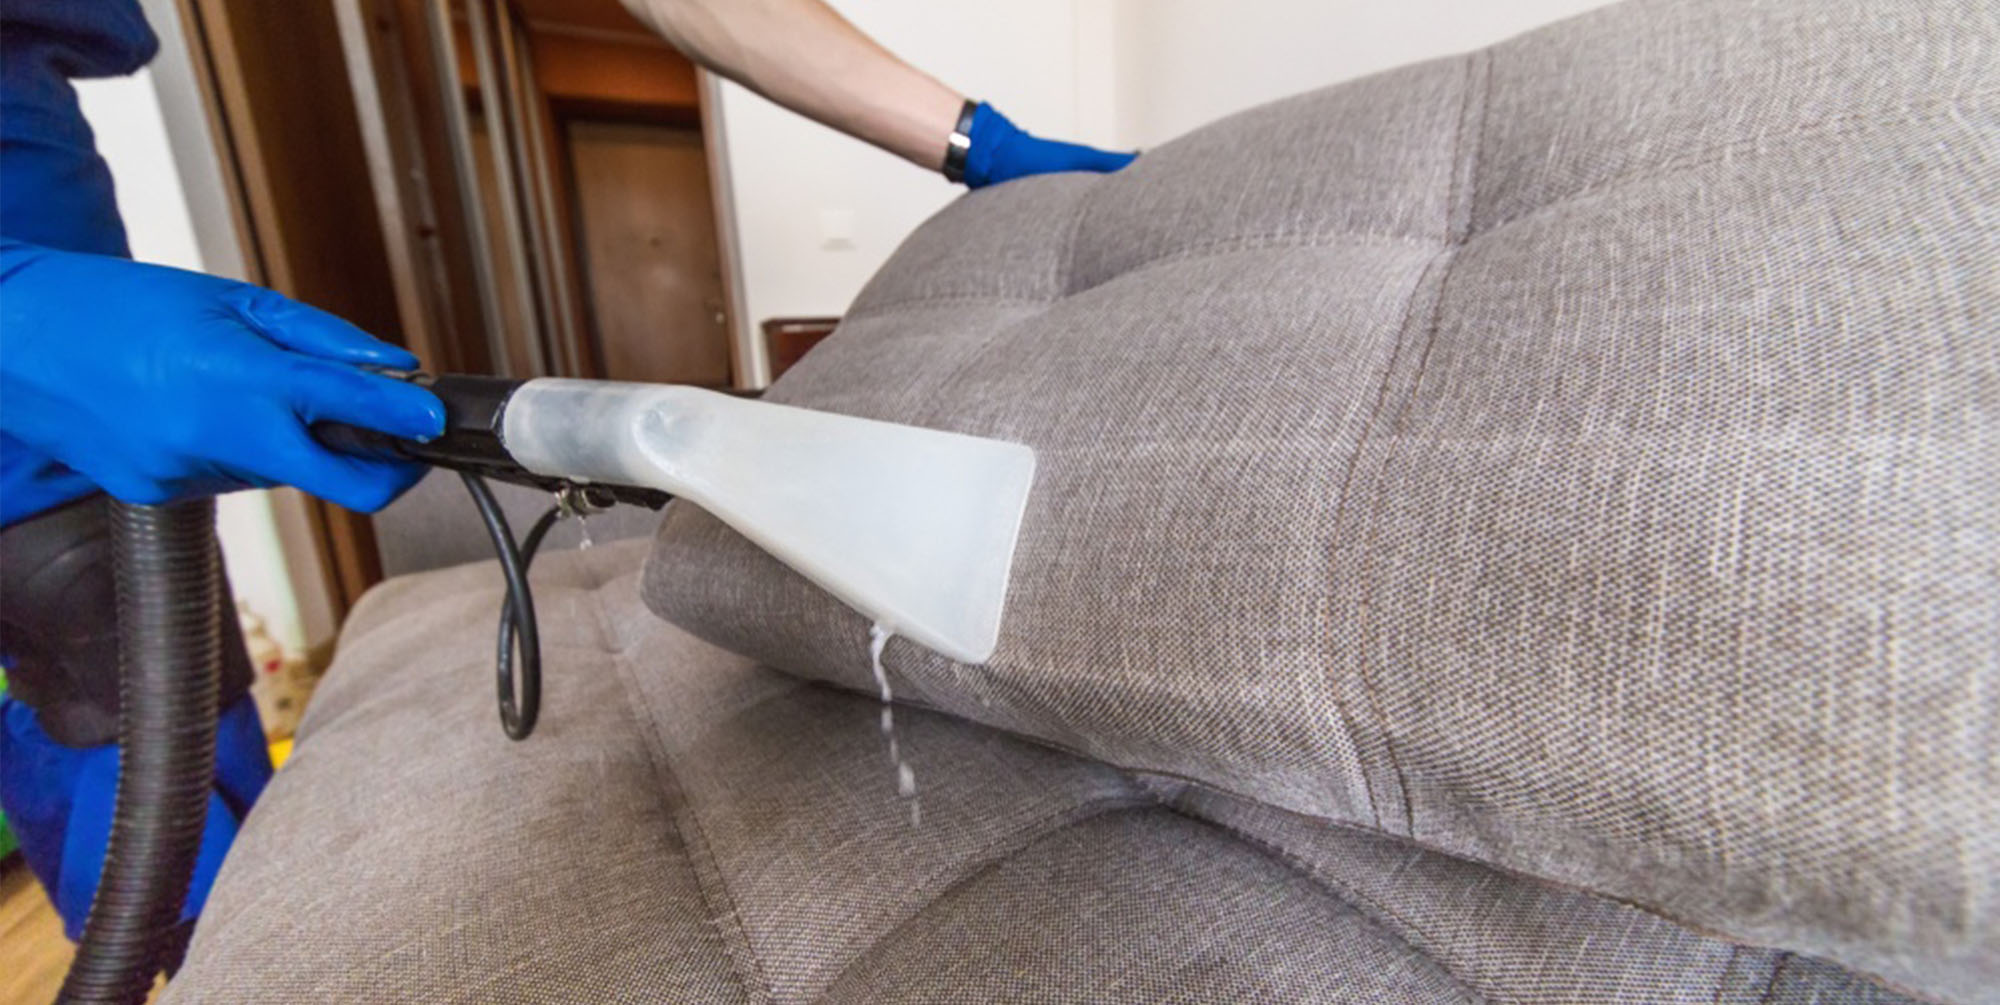 Upholstery Cleaning London